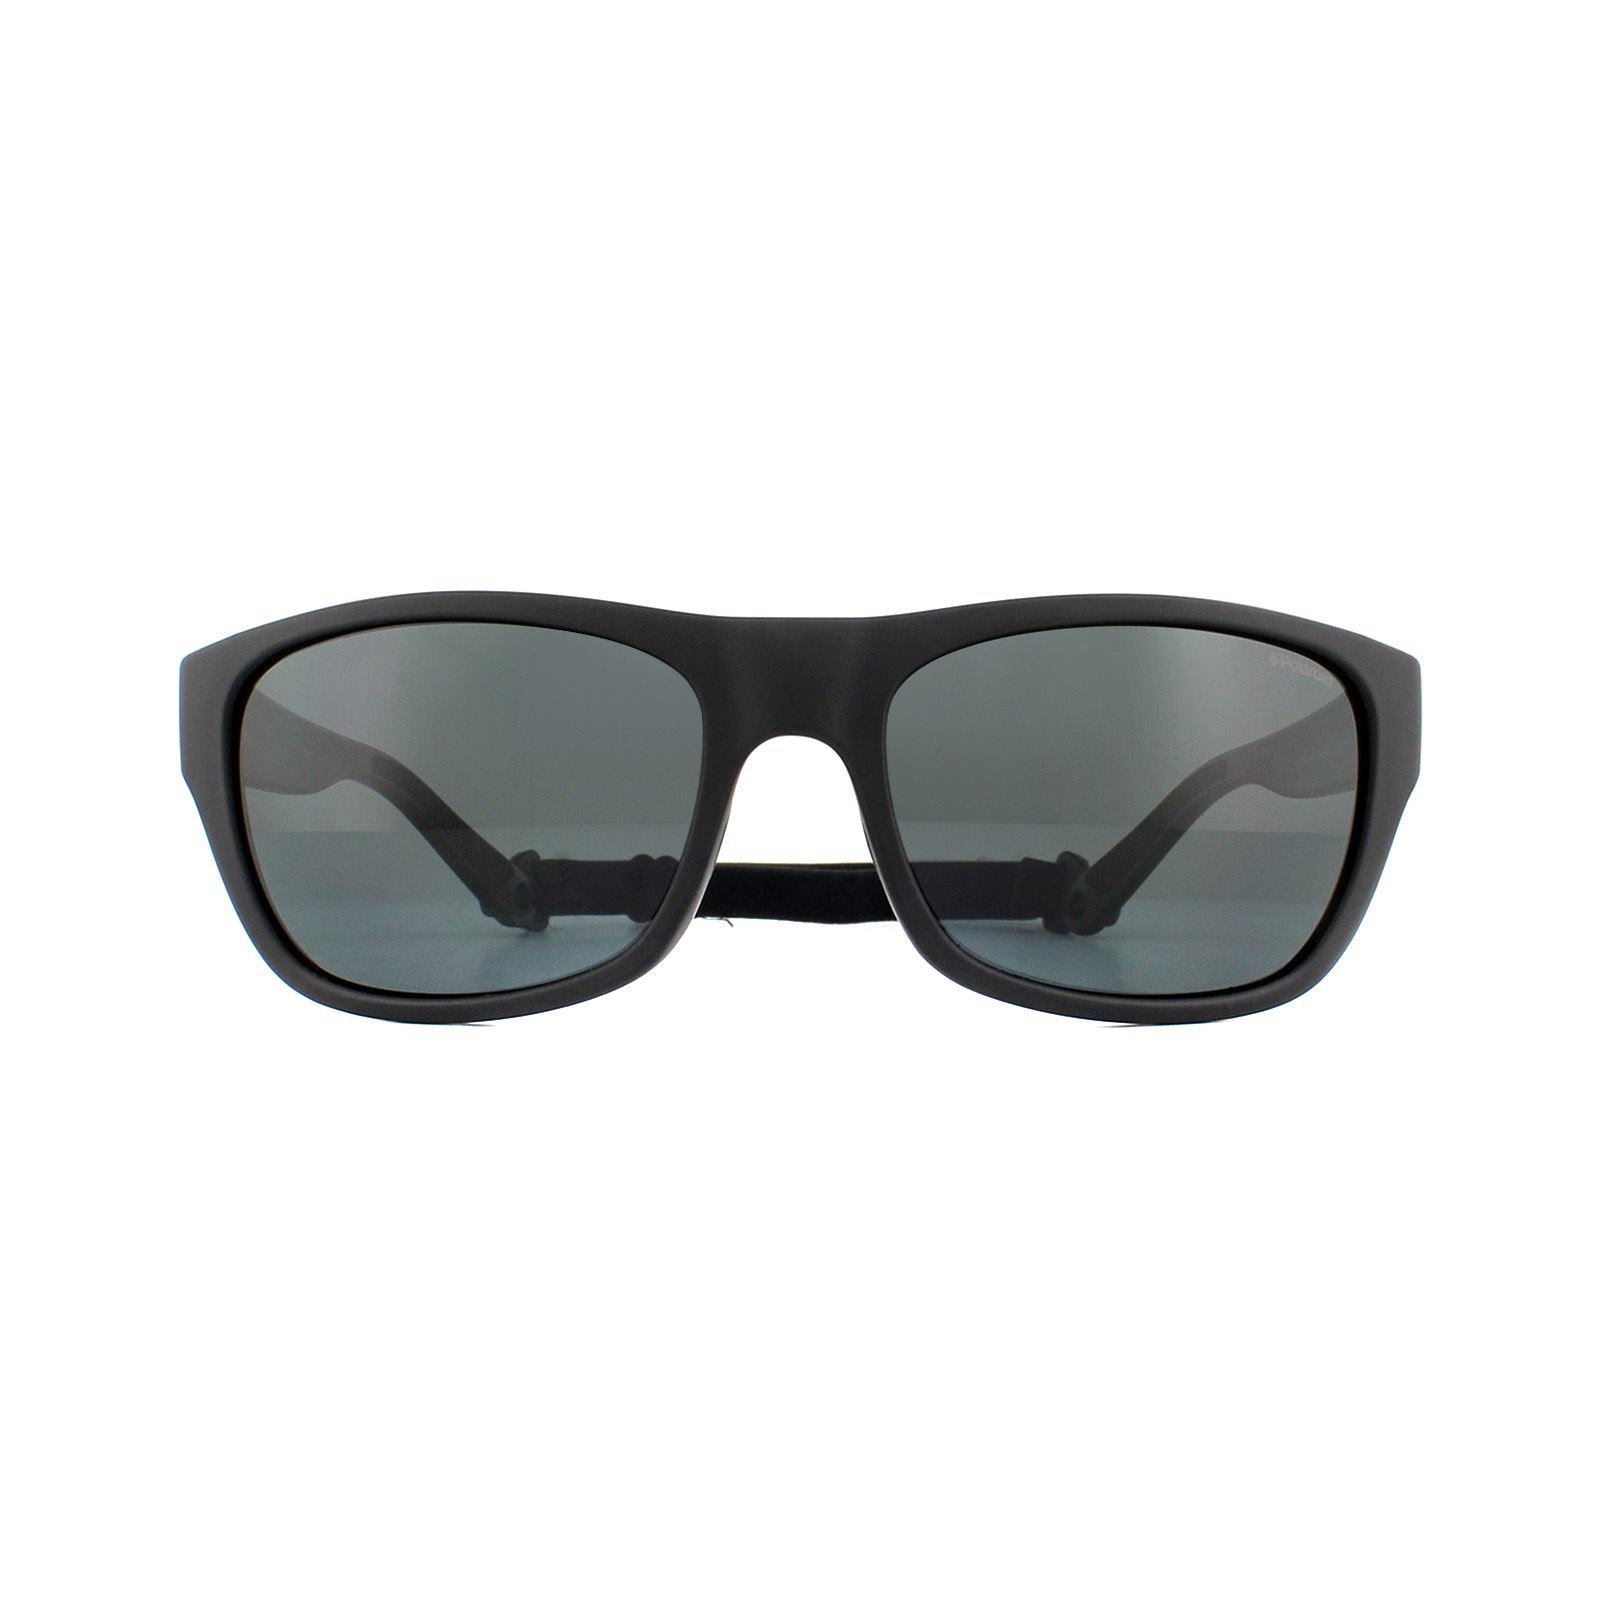 Polaroid Sport Sunglasses 7030/S 003 M9 Matte Black Grey Polarized are a sports style with a strap to hold the sunglasses in place. The lightweight plastic frame is comfortable for long wear and polarized lenses help to reduce glare and protect the eyes.